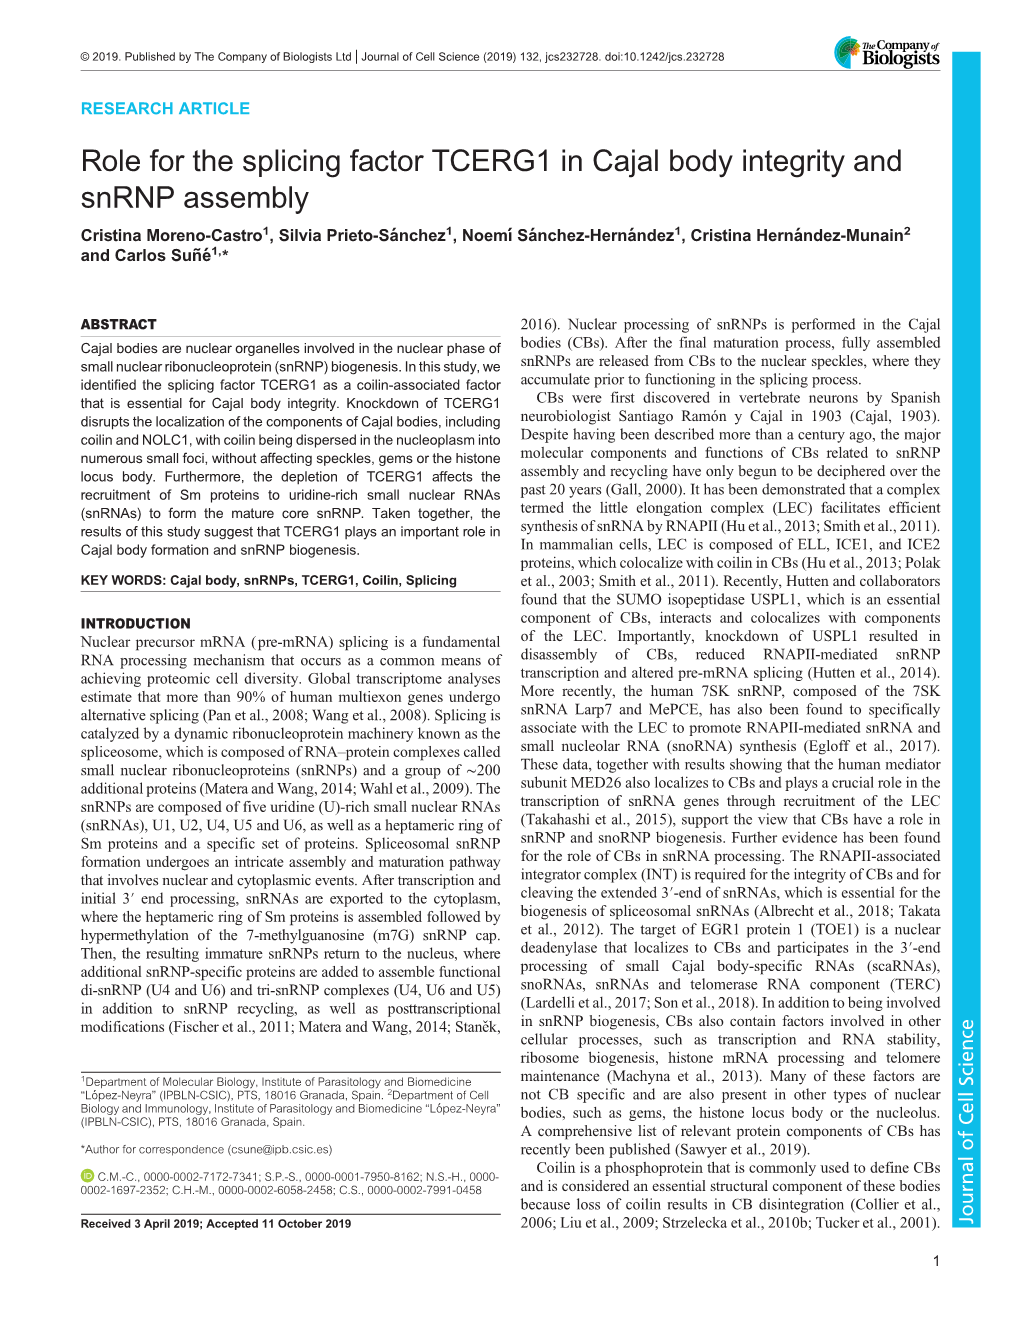 Role for the Splicing Factor TCERG1 in Cajal Body Integrity and Snrnp